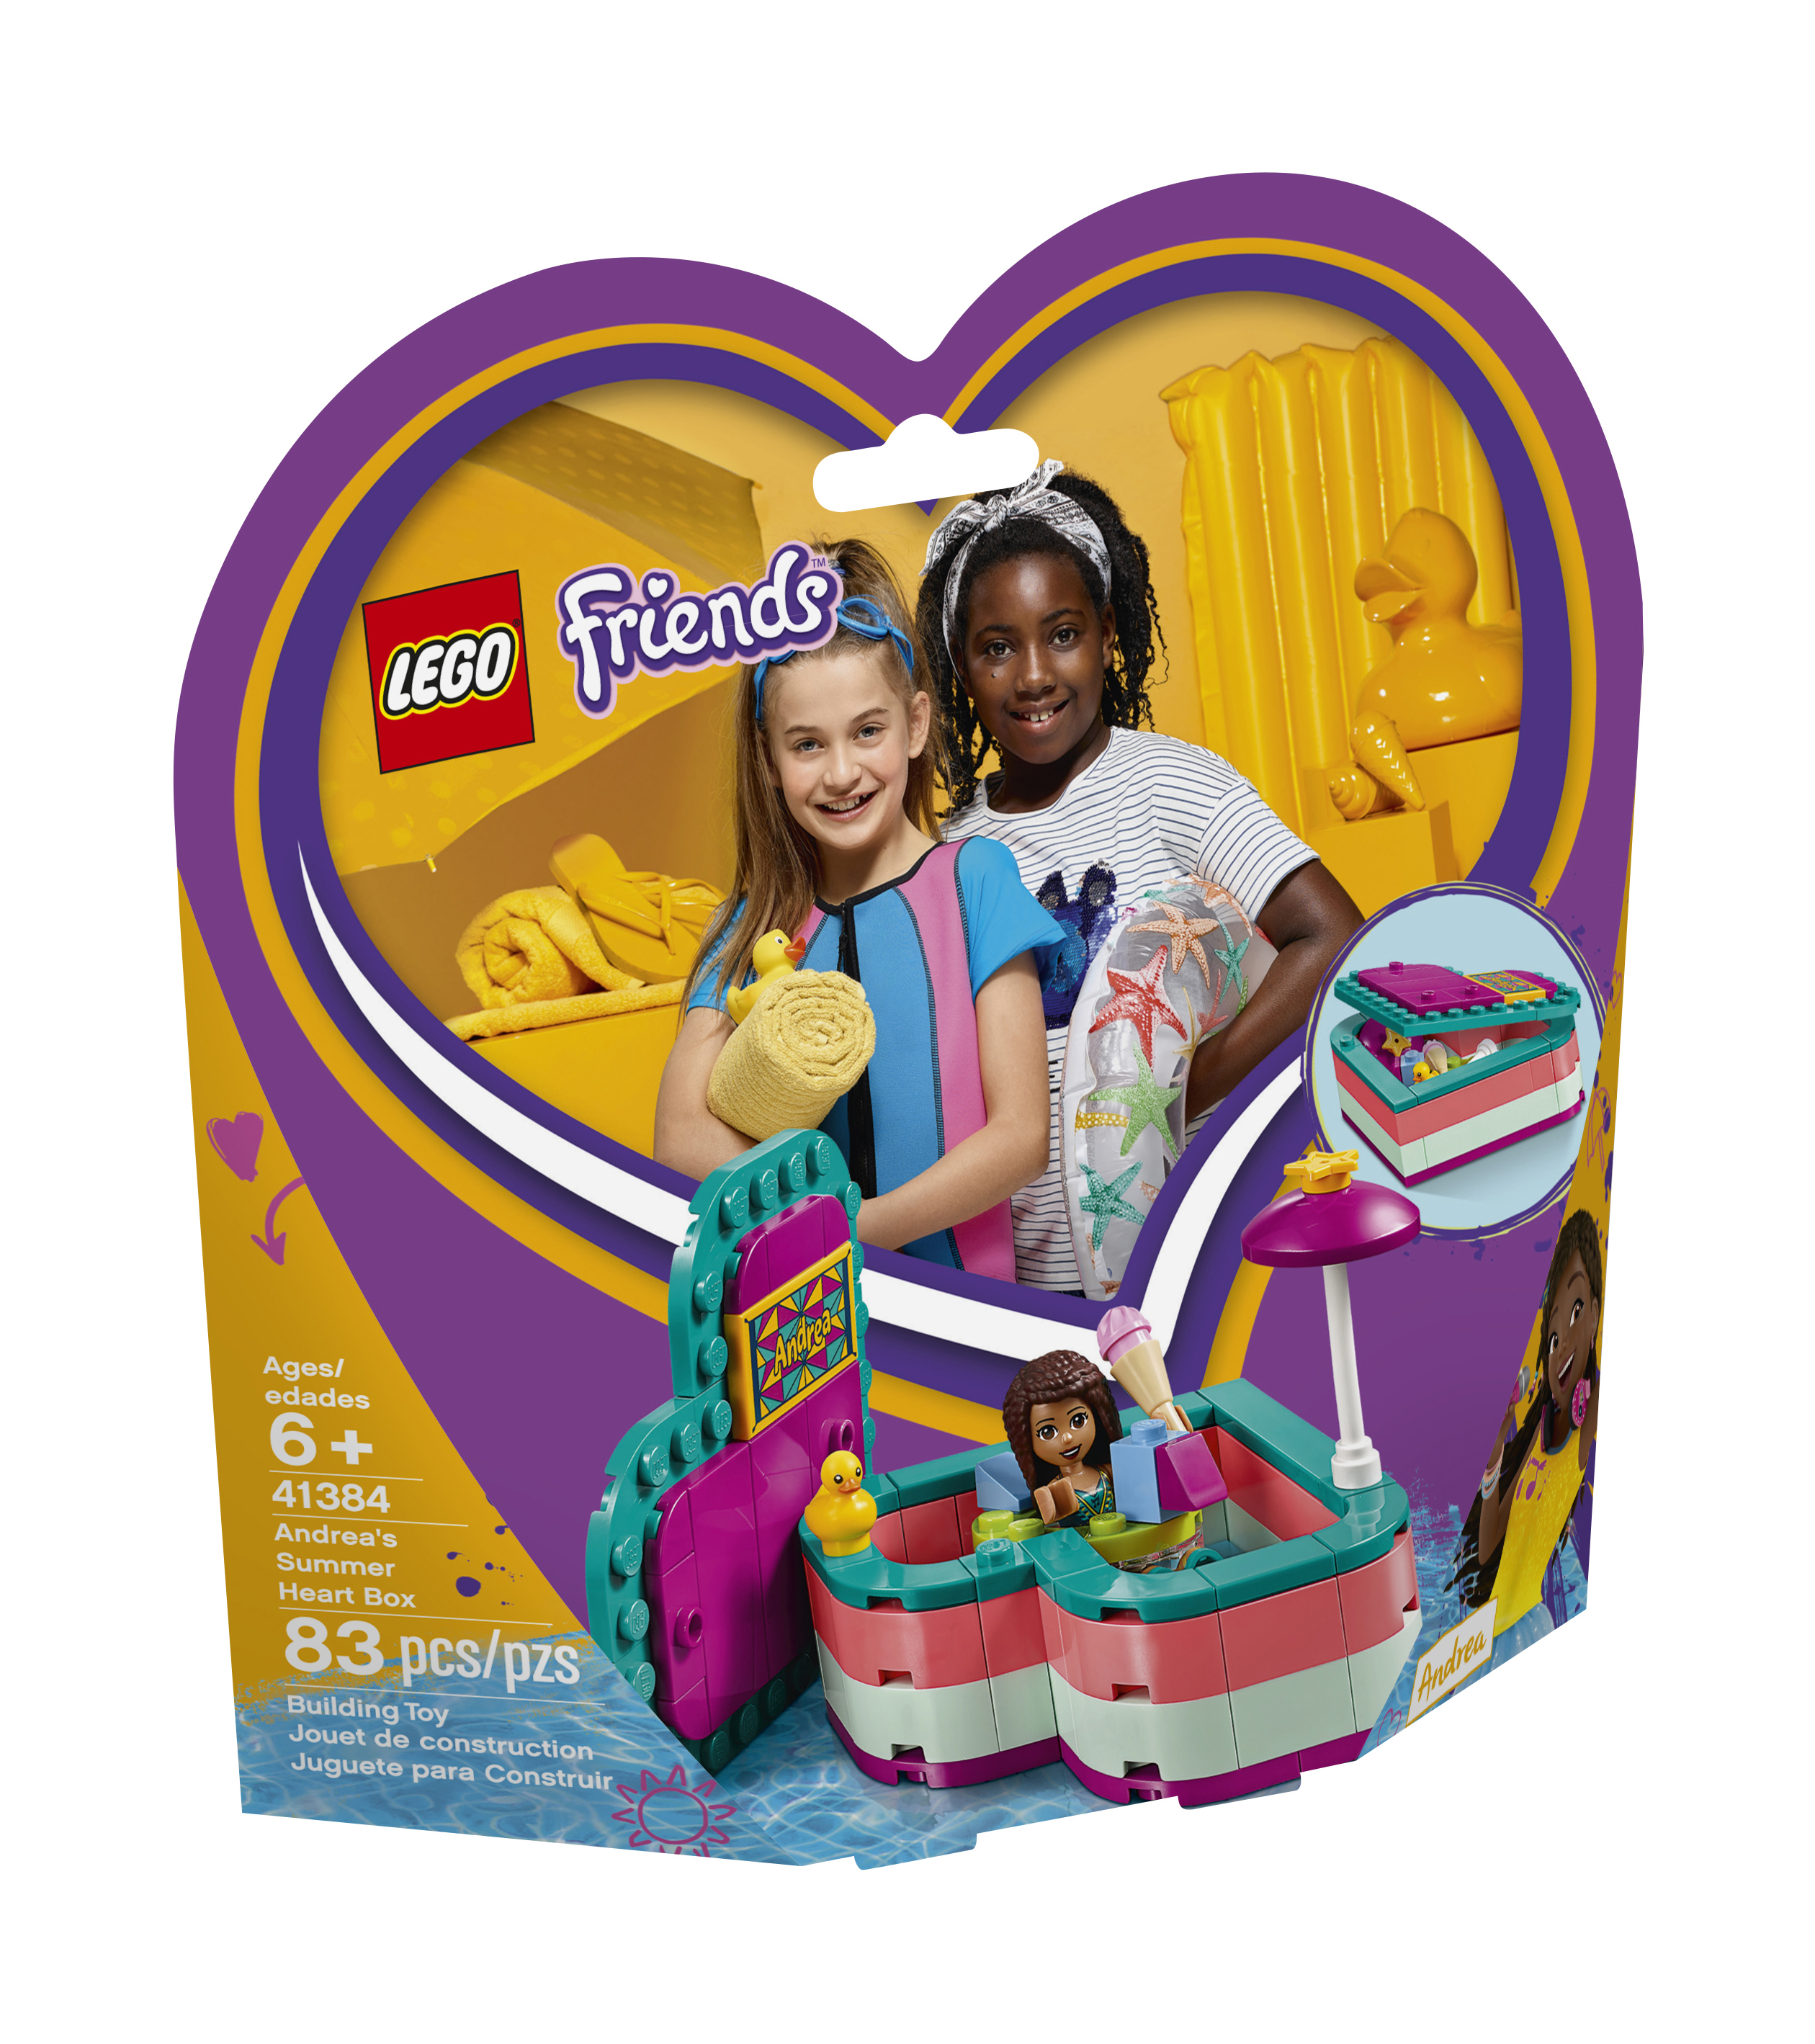 LEGO Friends Andrea's Summer Heart Box 41384 Building Set (83 Pieces) - image 5 of 8